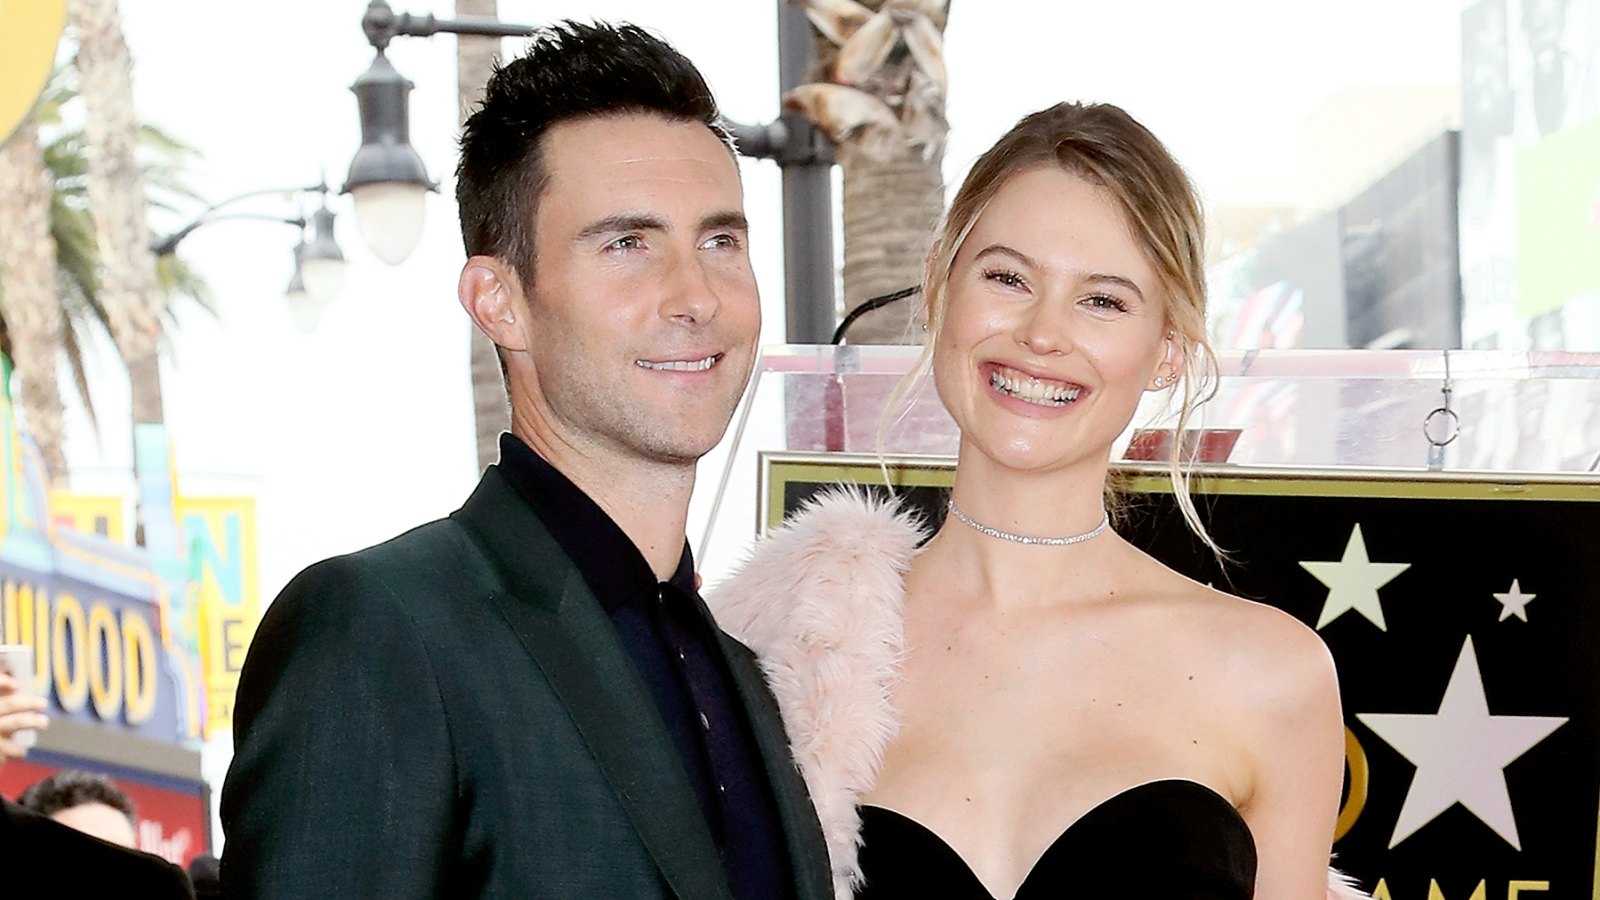 Adam Levine and Behati Prinsloo attend his being honored with a Star on the Hollywood Walk of Fame on February 10, 2017 in Hollywood, California.